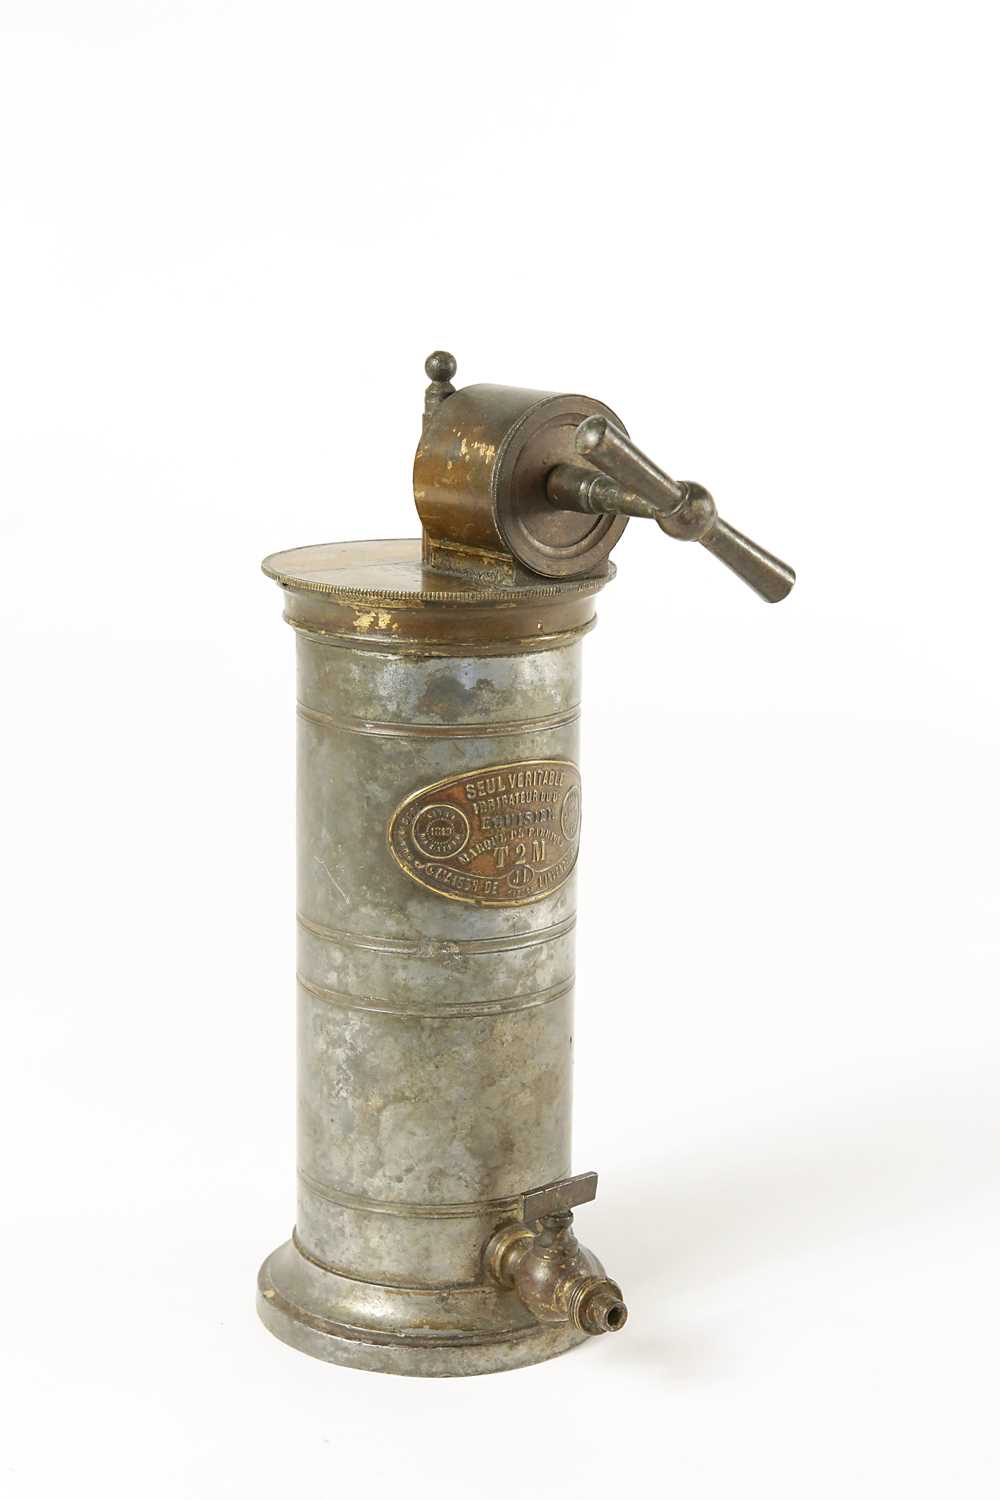 Lot 201 - An Antique French Vaginal Douche, by Dr. Maurice Eguisier (1813-1851)